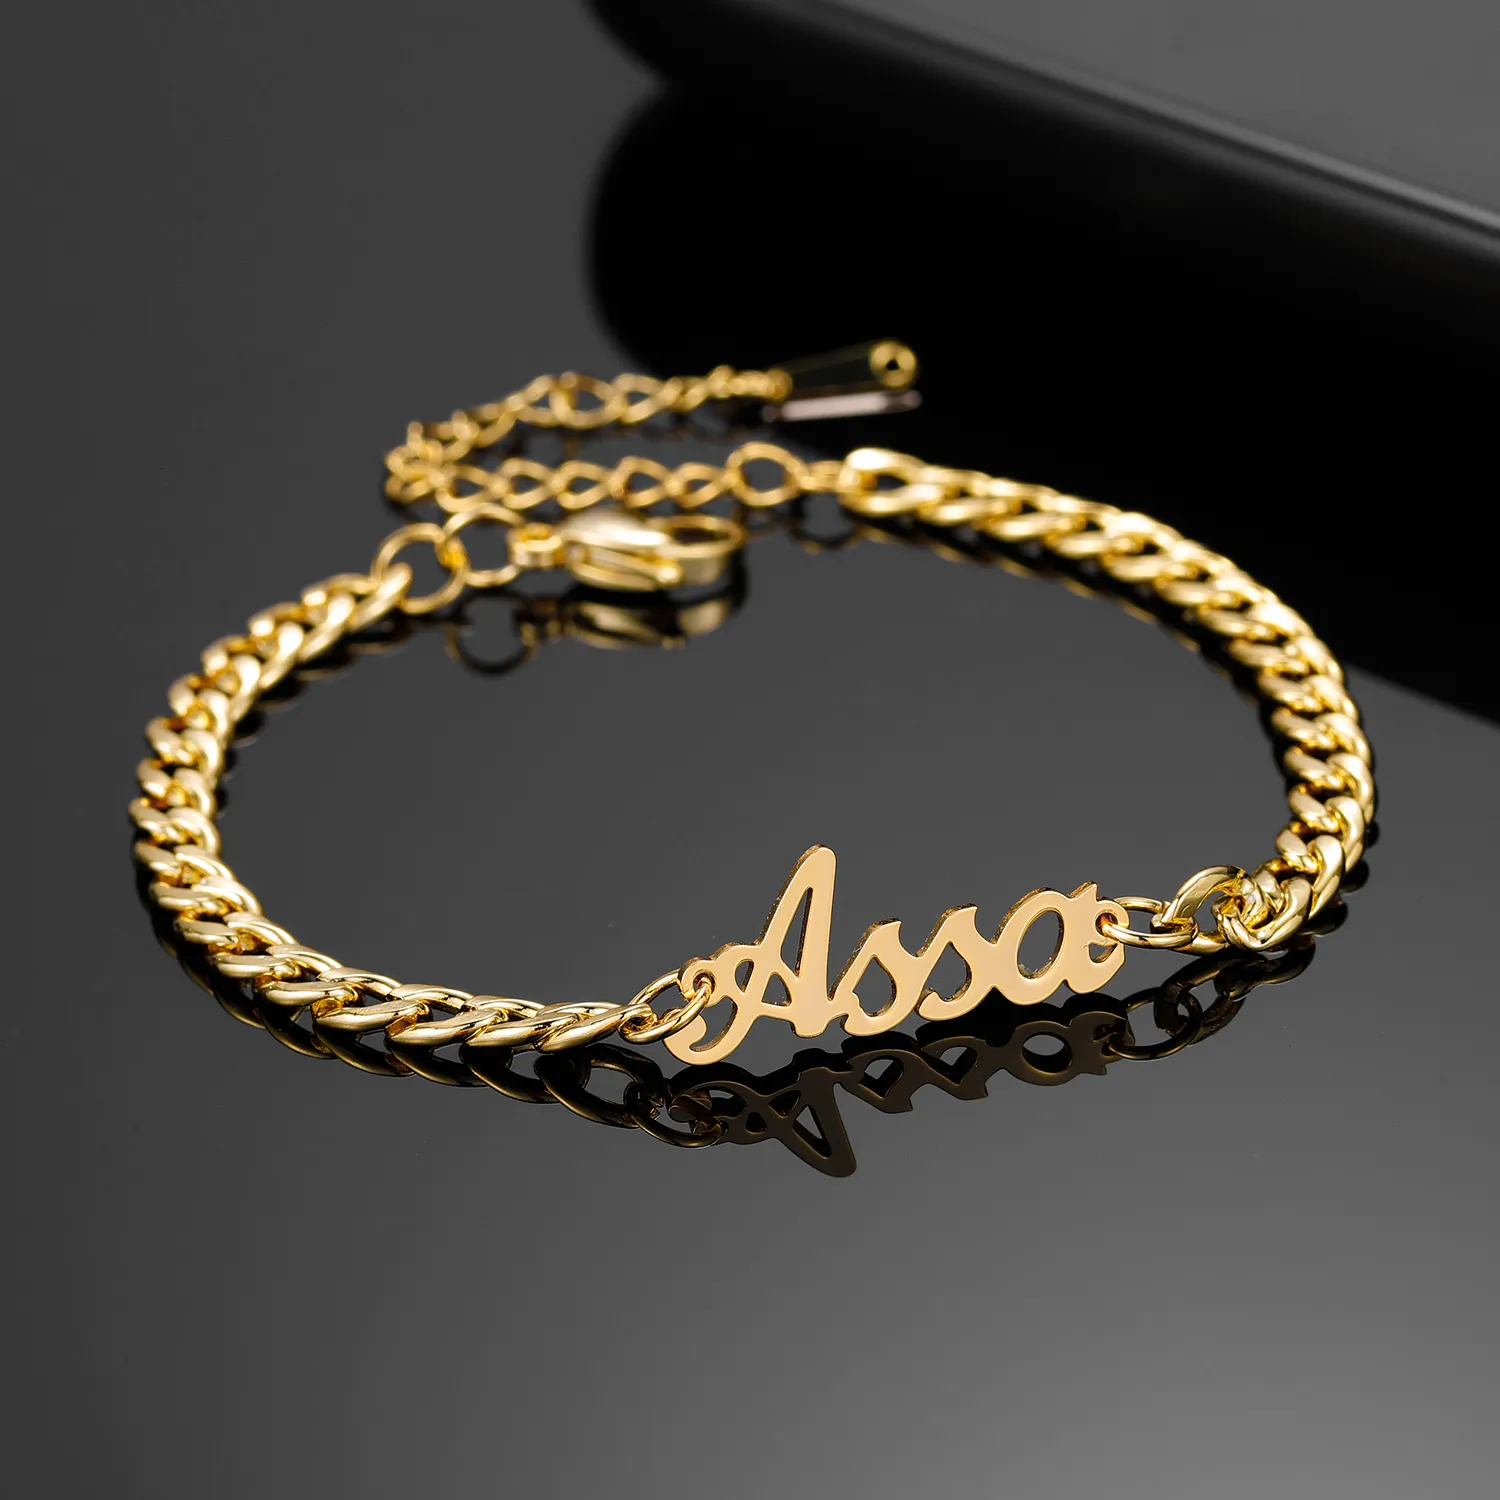 Cuff Personalized Name Bracelet 18K gold plated Stainless Steel Curb Chain Custom Bracelet Bangle Handmade Men Jewelry For Women Gift 230716